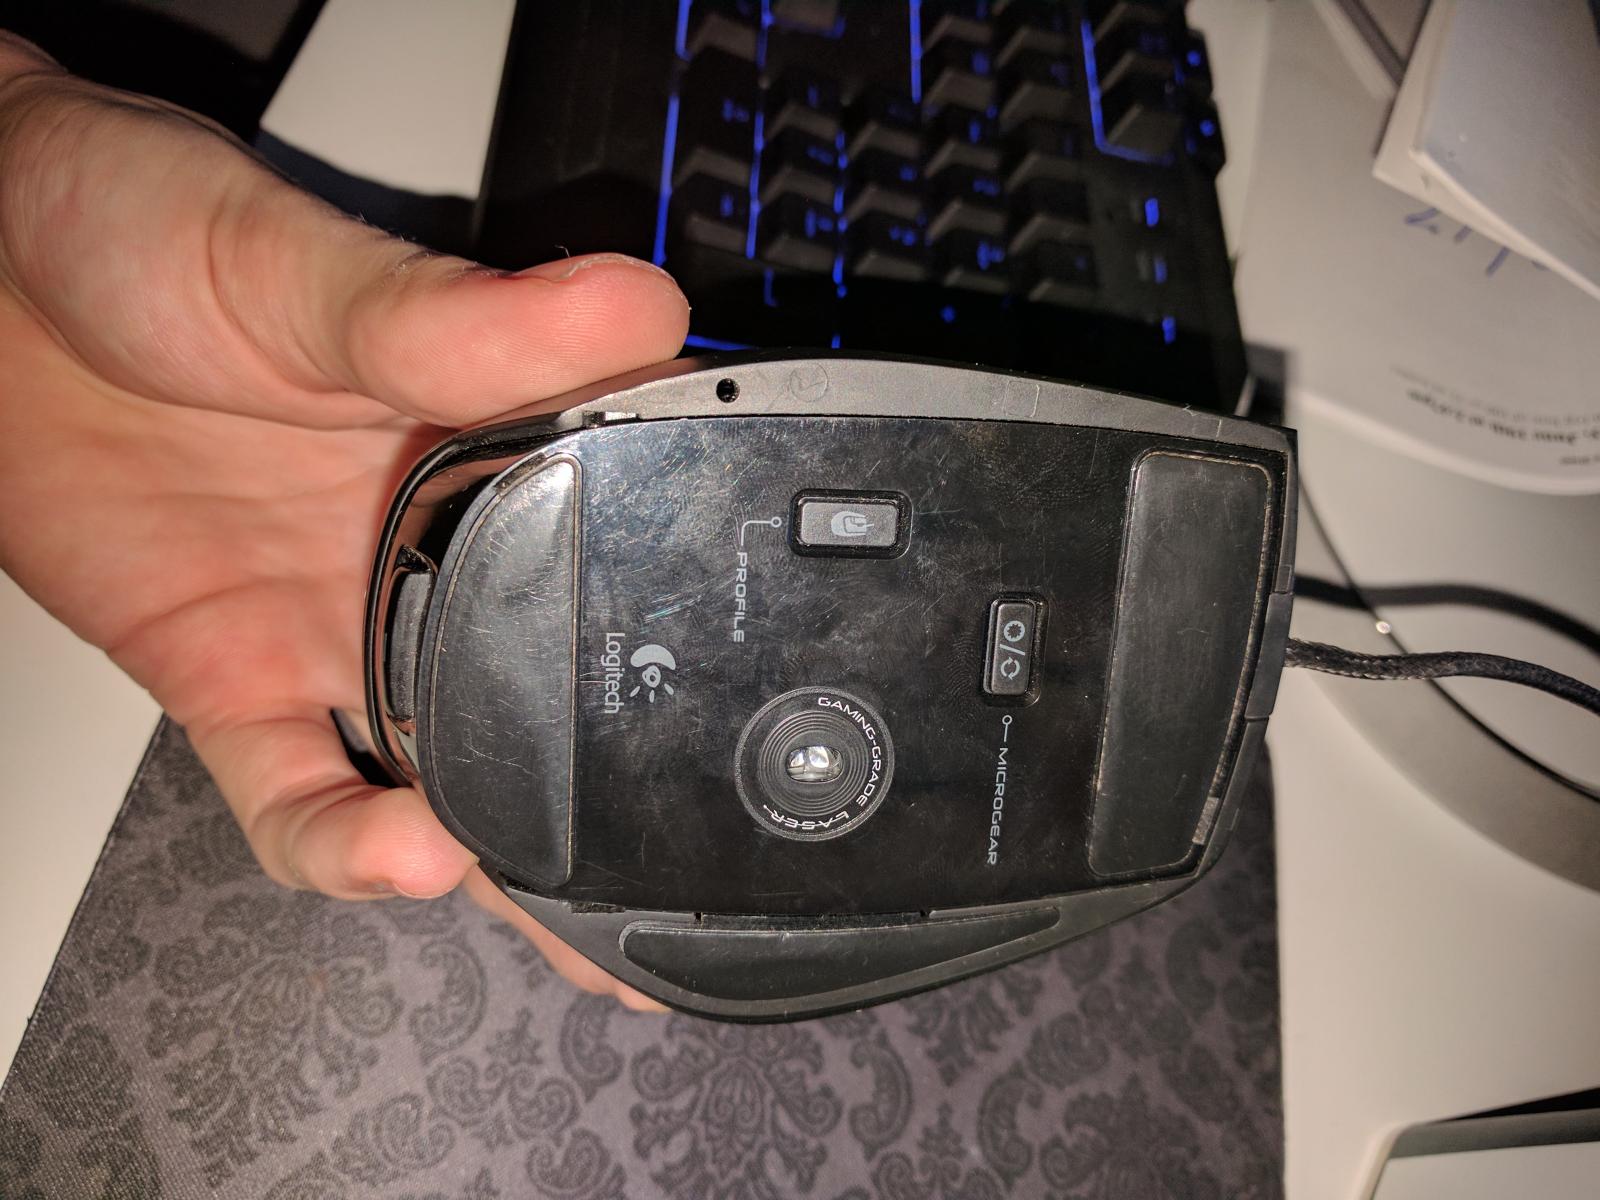 For sale Logitech G9x - used *PRICE DROPPED A LOT*